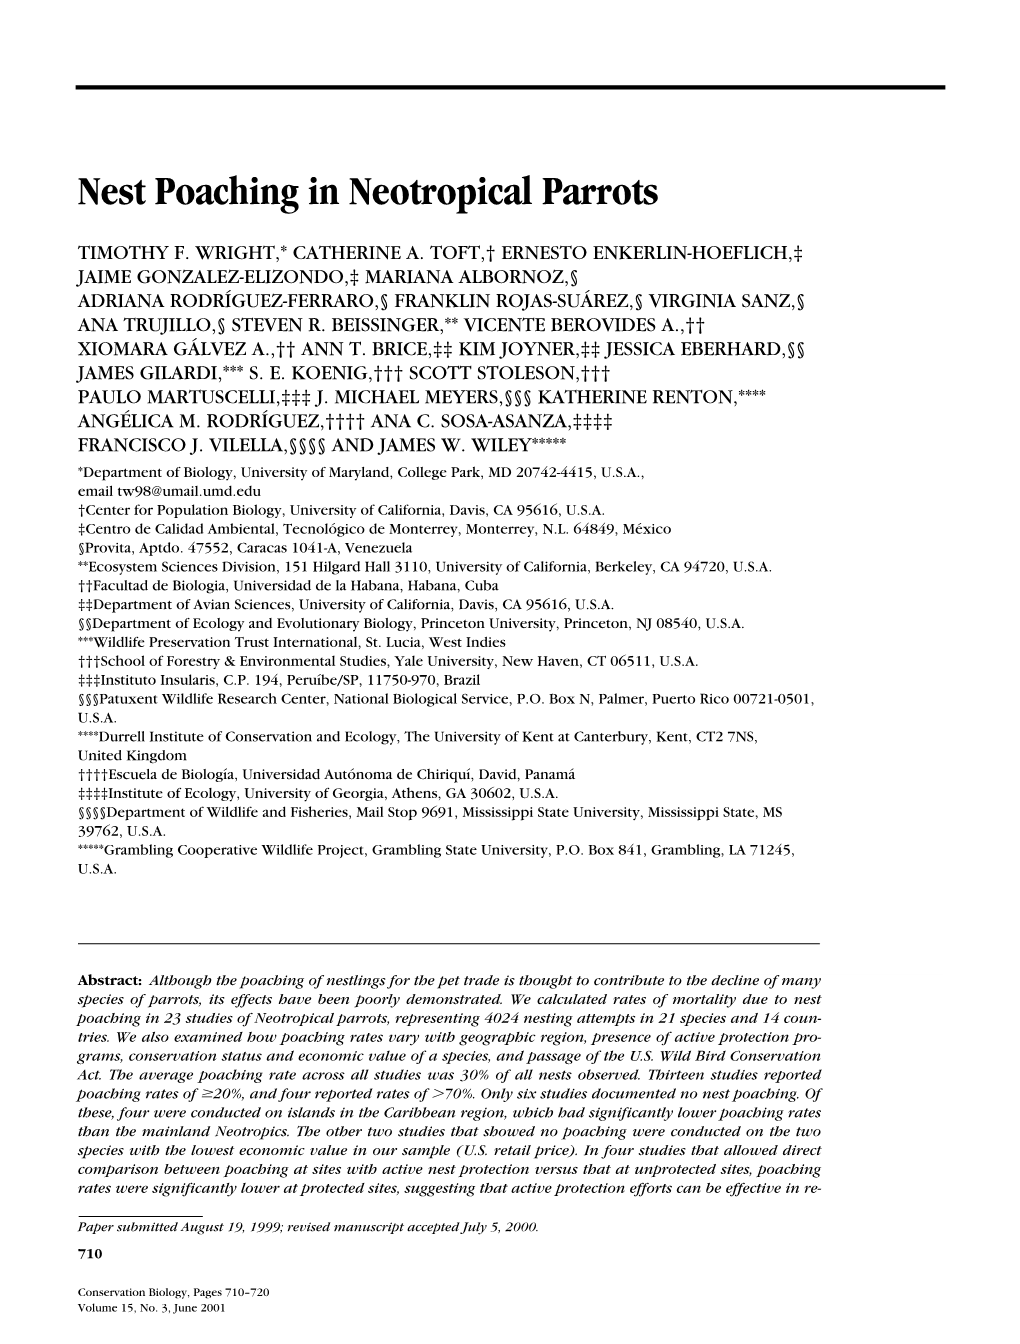 Nest Poaching in Neotropical Parrots